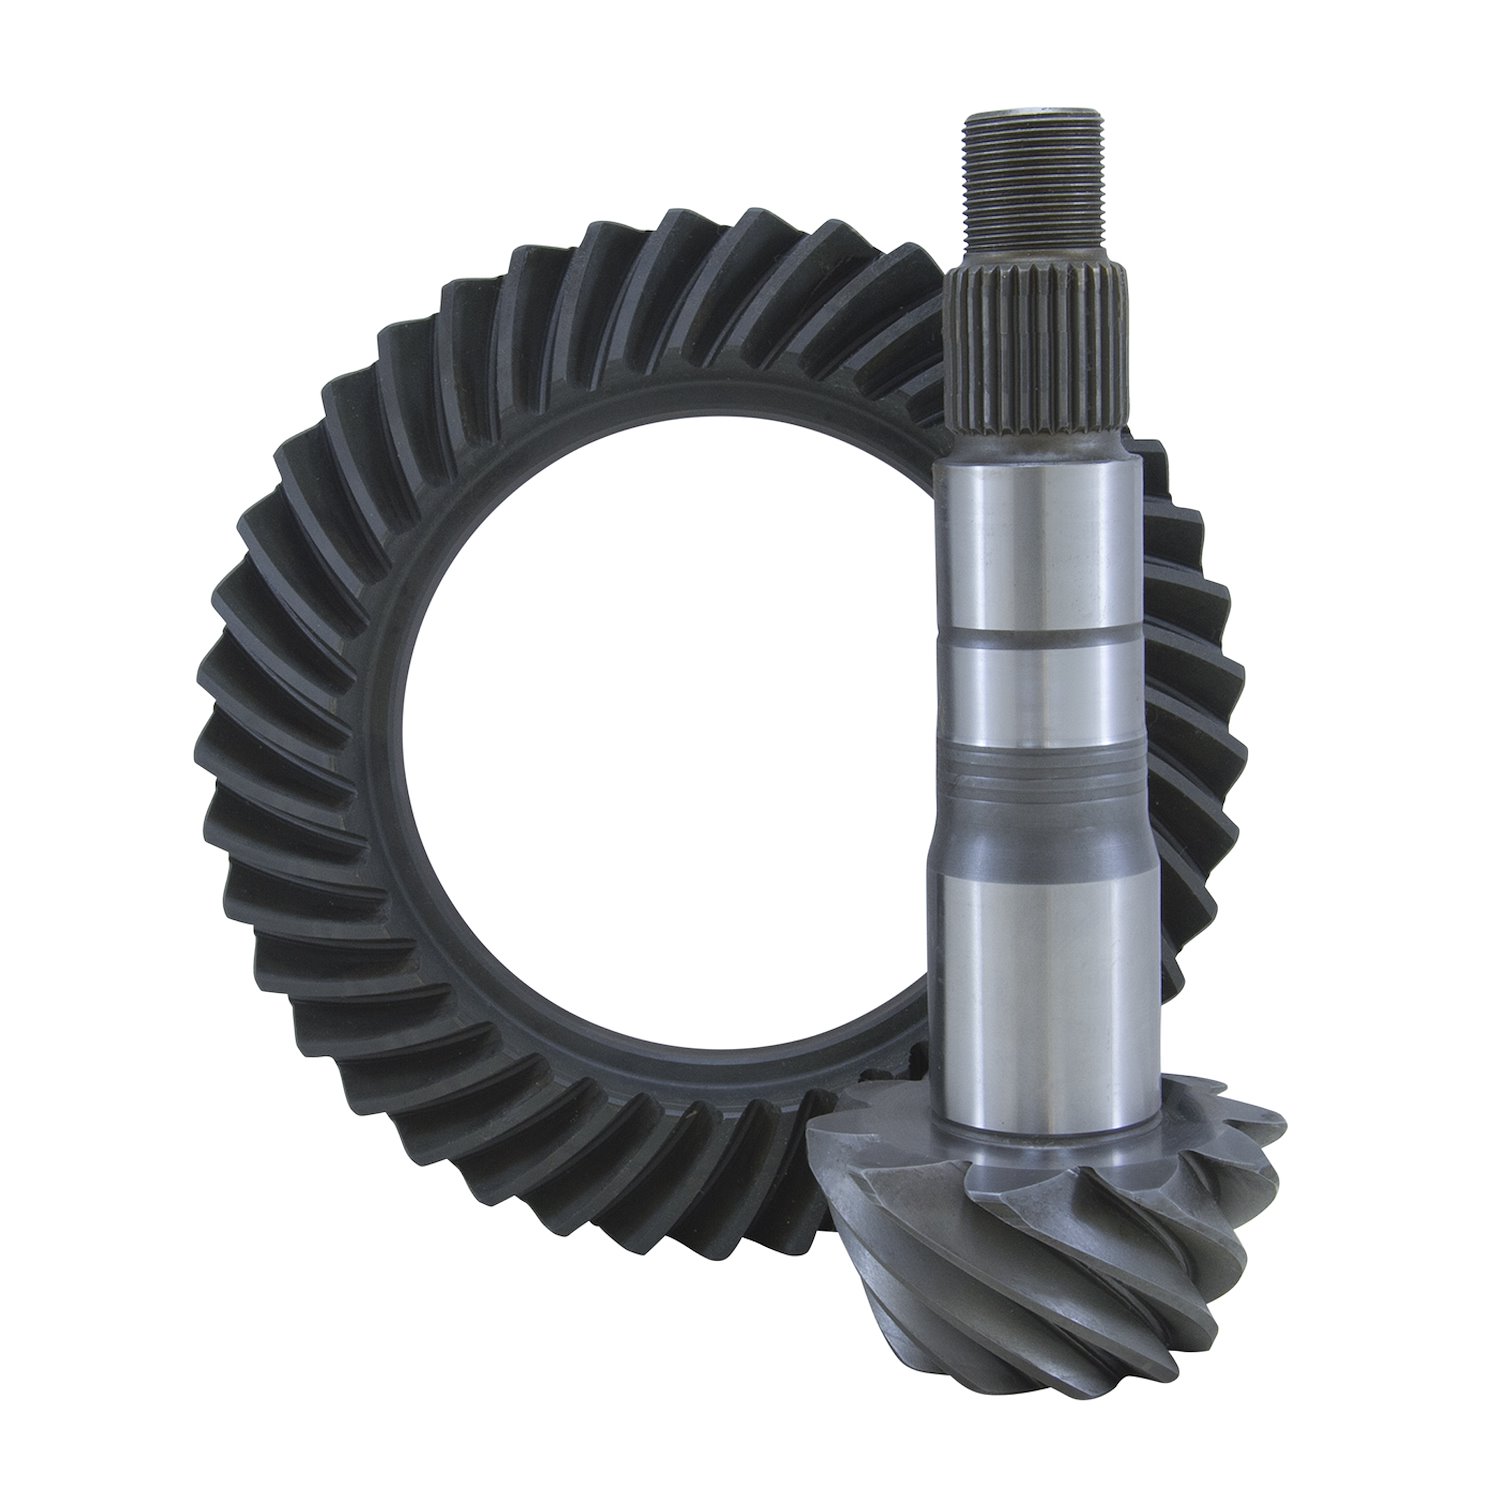 USA Standard ZG T100-411 Ring & Pinion Gear Set, For Toyota T100 And Tacoma, 4.11 Ratio